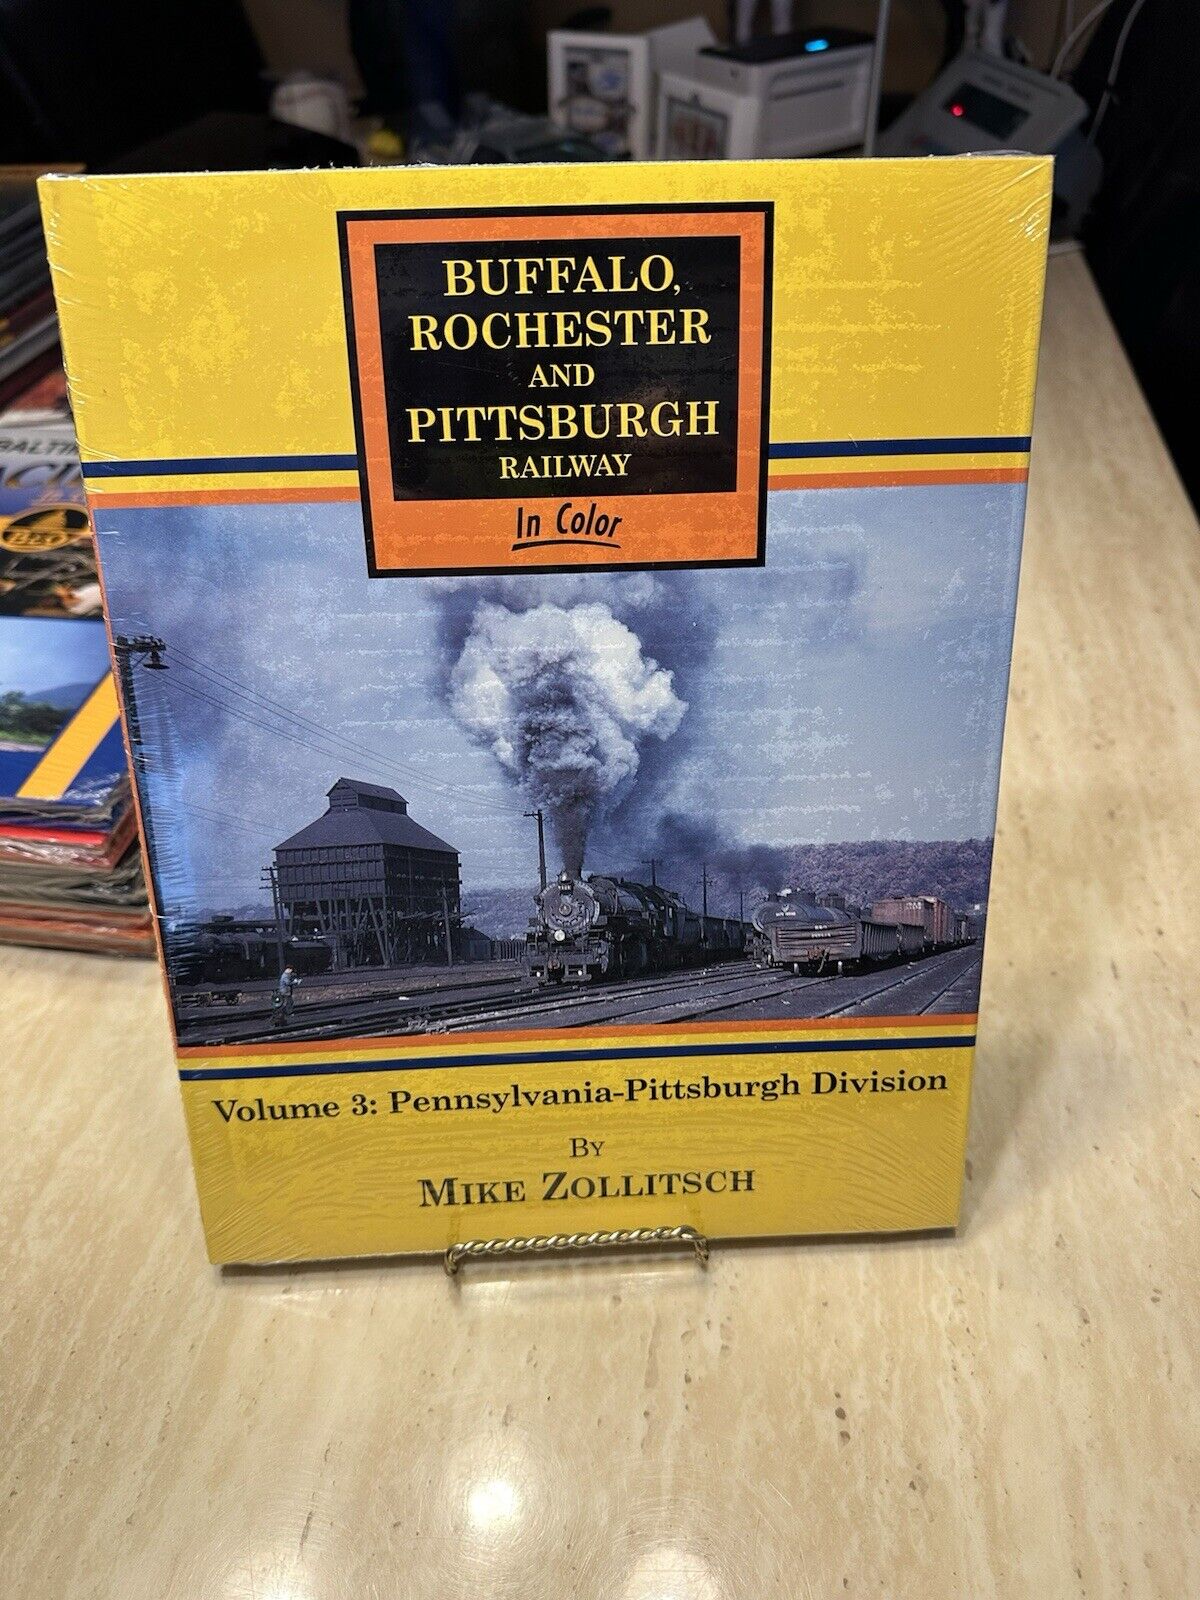 Morning Sun: Buffalo, Rochester and Pittsburgh Vol. 3 by Mike Zollitsch ©2010 HC